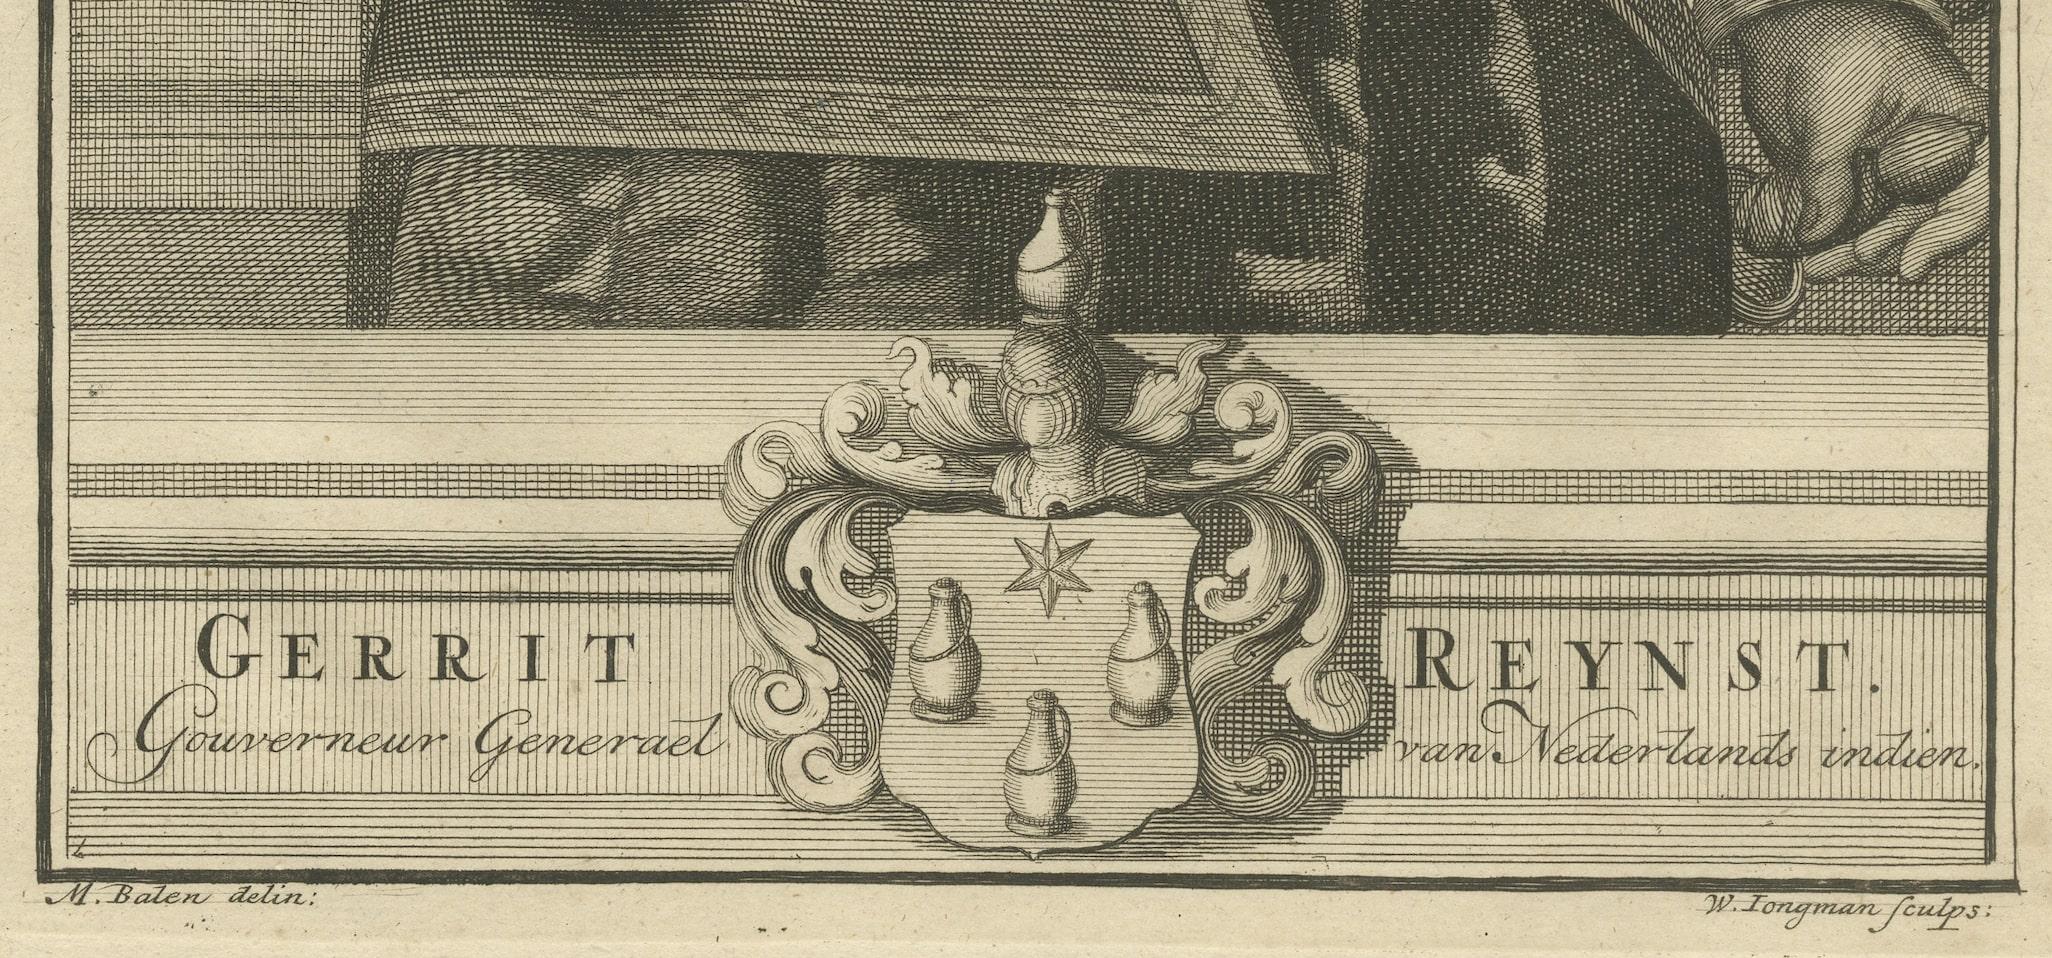 Engraved VOC Governor Gerrit Reynst: A Dutch Master of Colonial Trade - 1724 Engraving For Sale